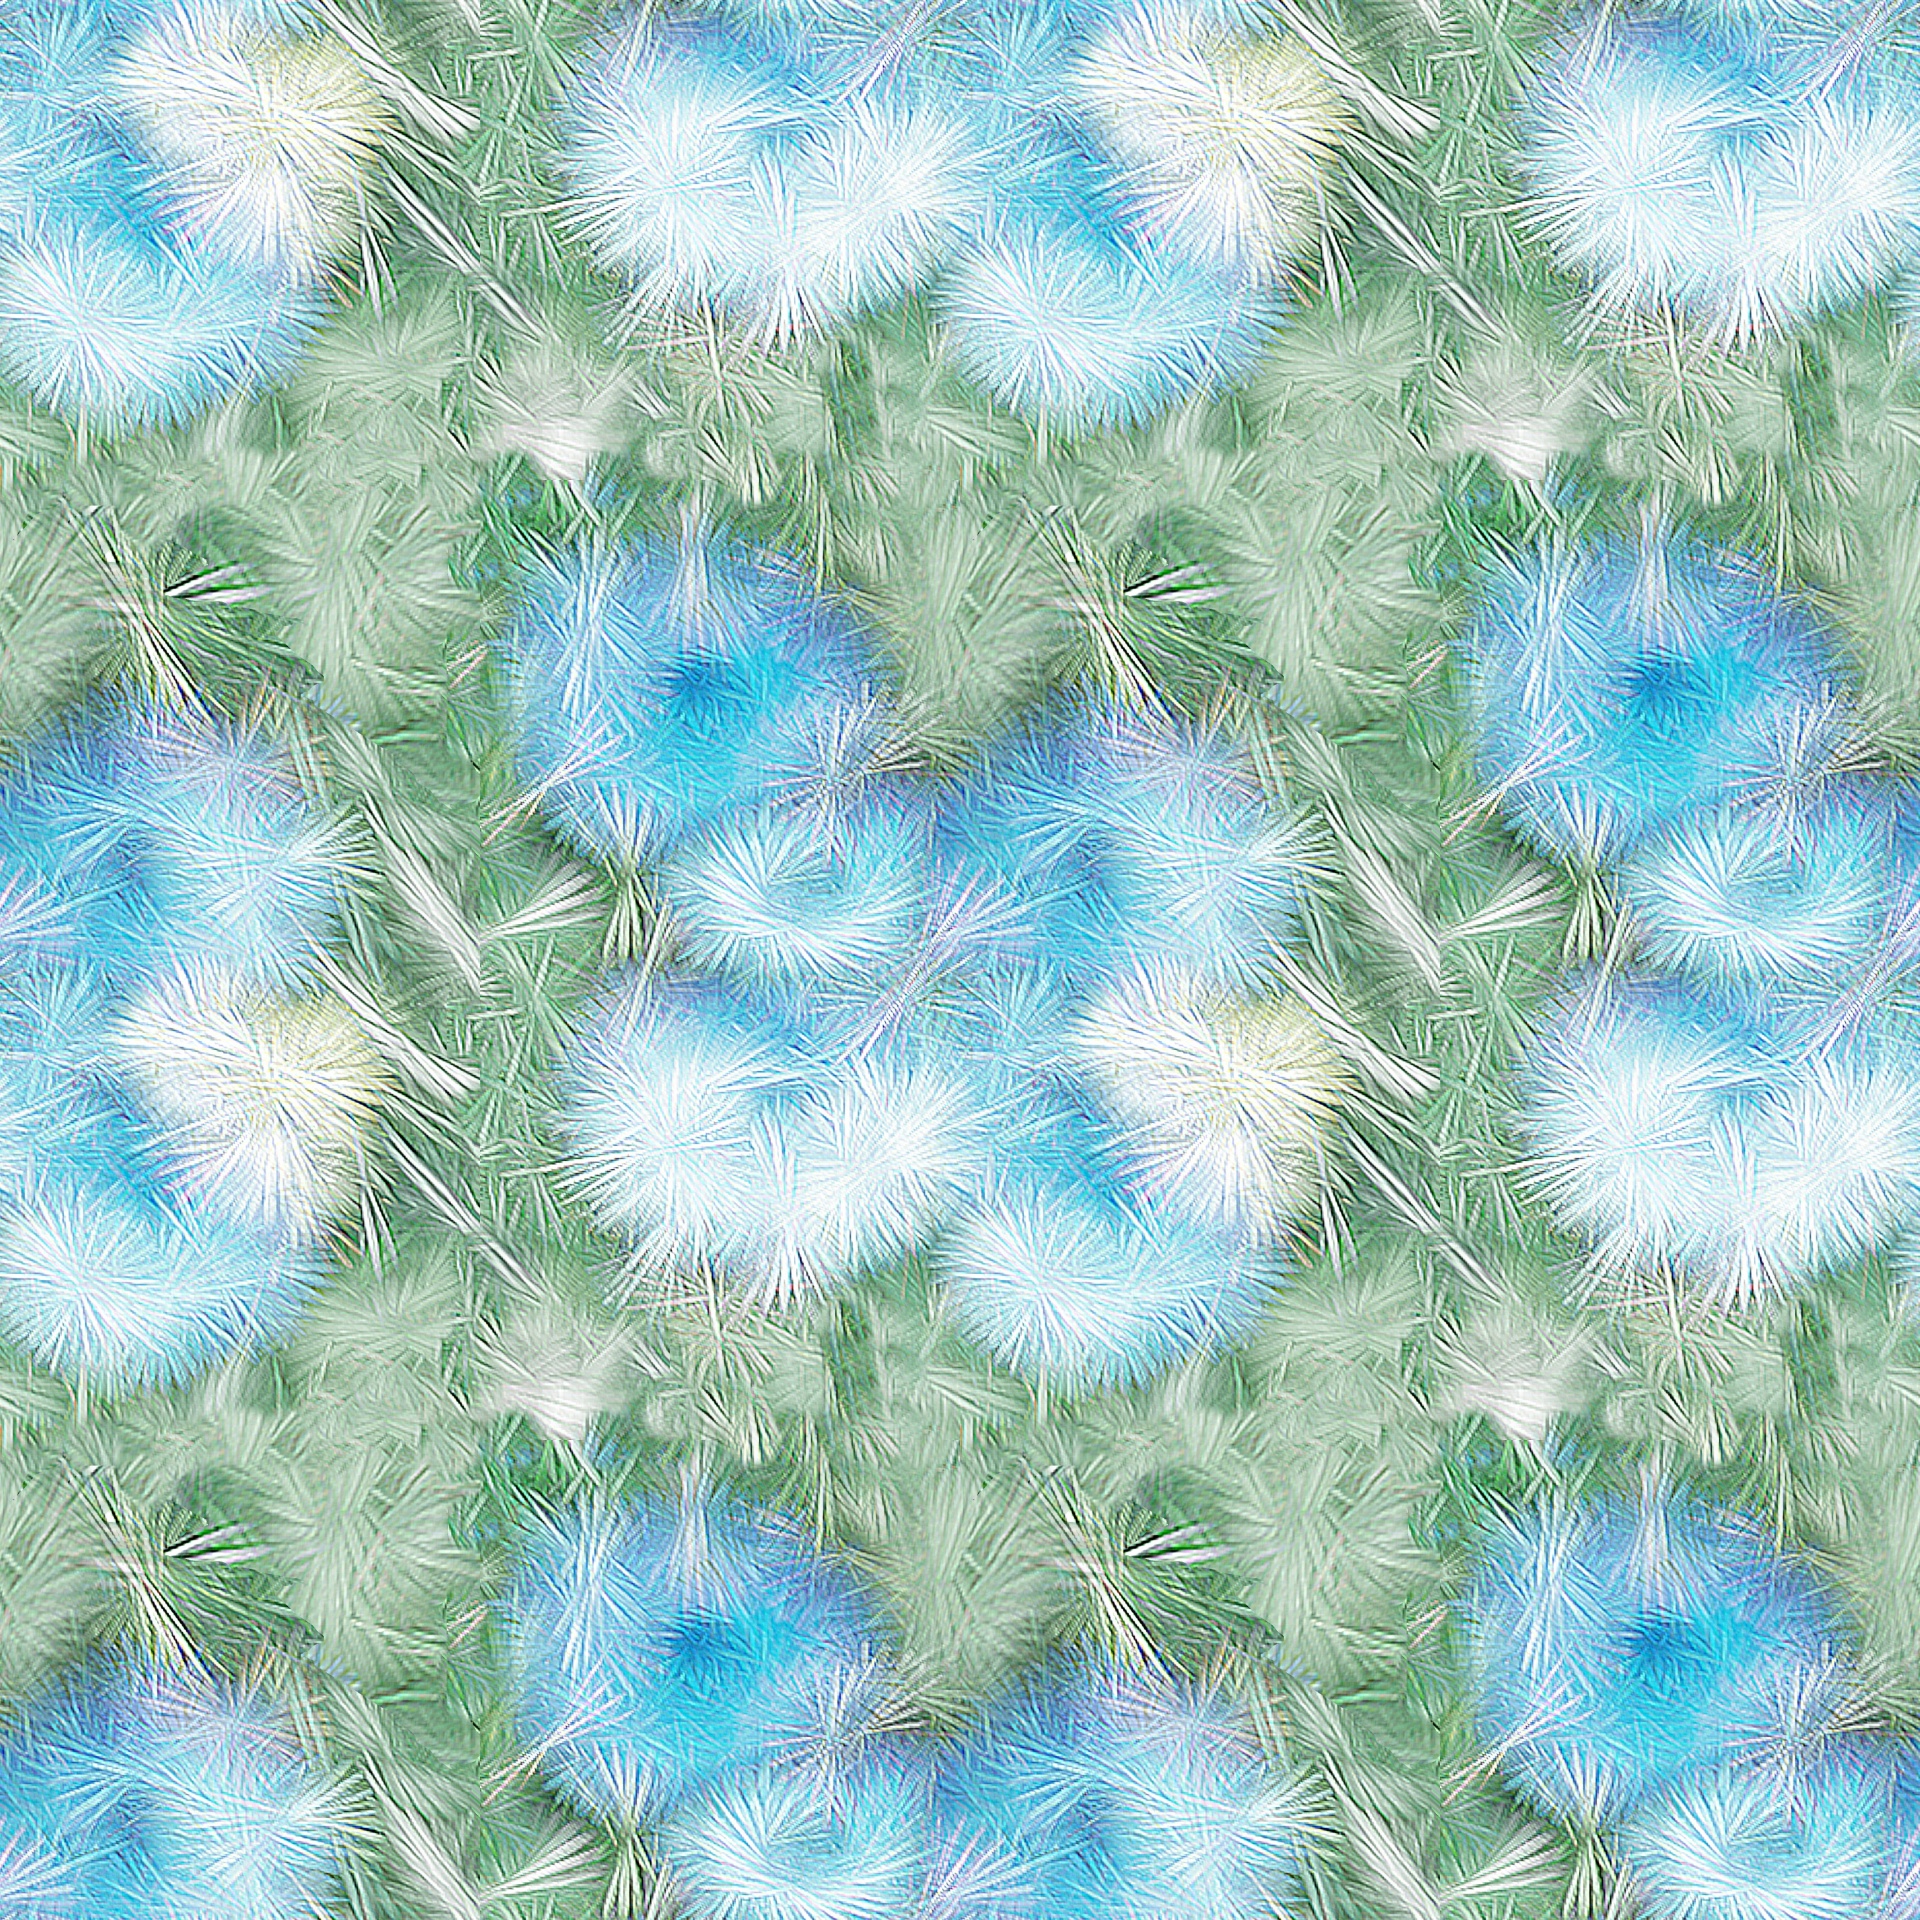 Blue abstract floral pattern with spikey shards interlocking in a repeat tile design.